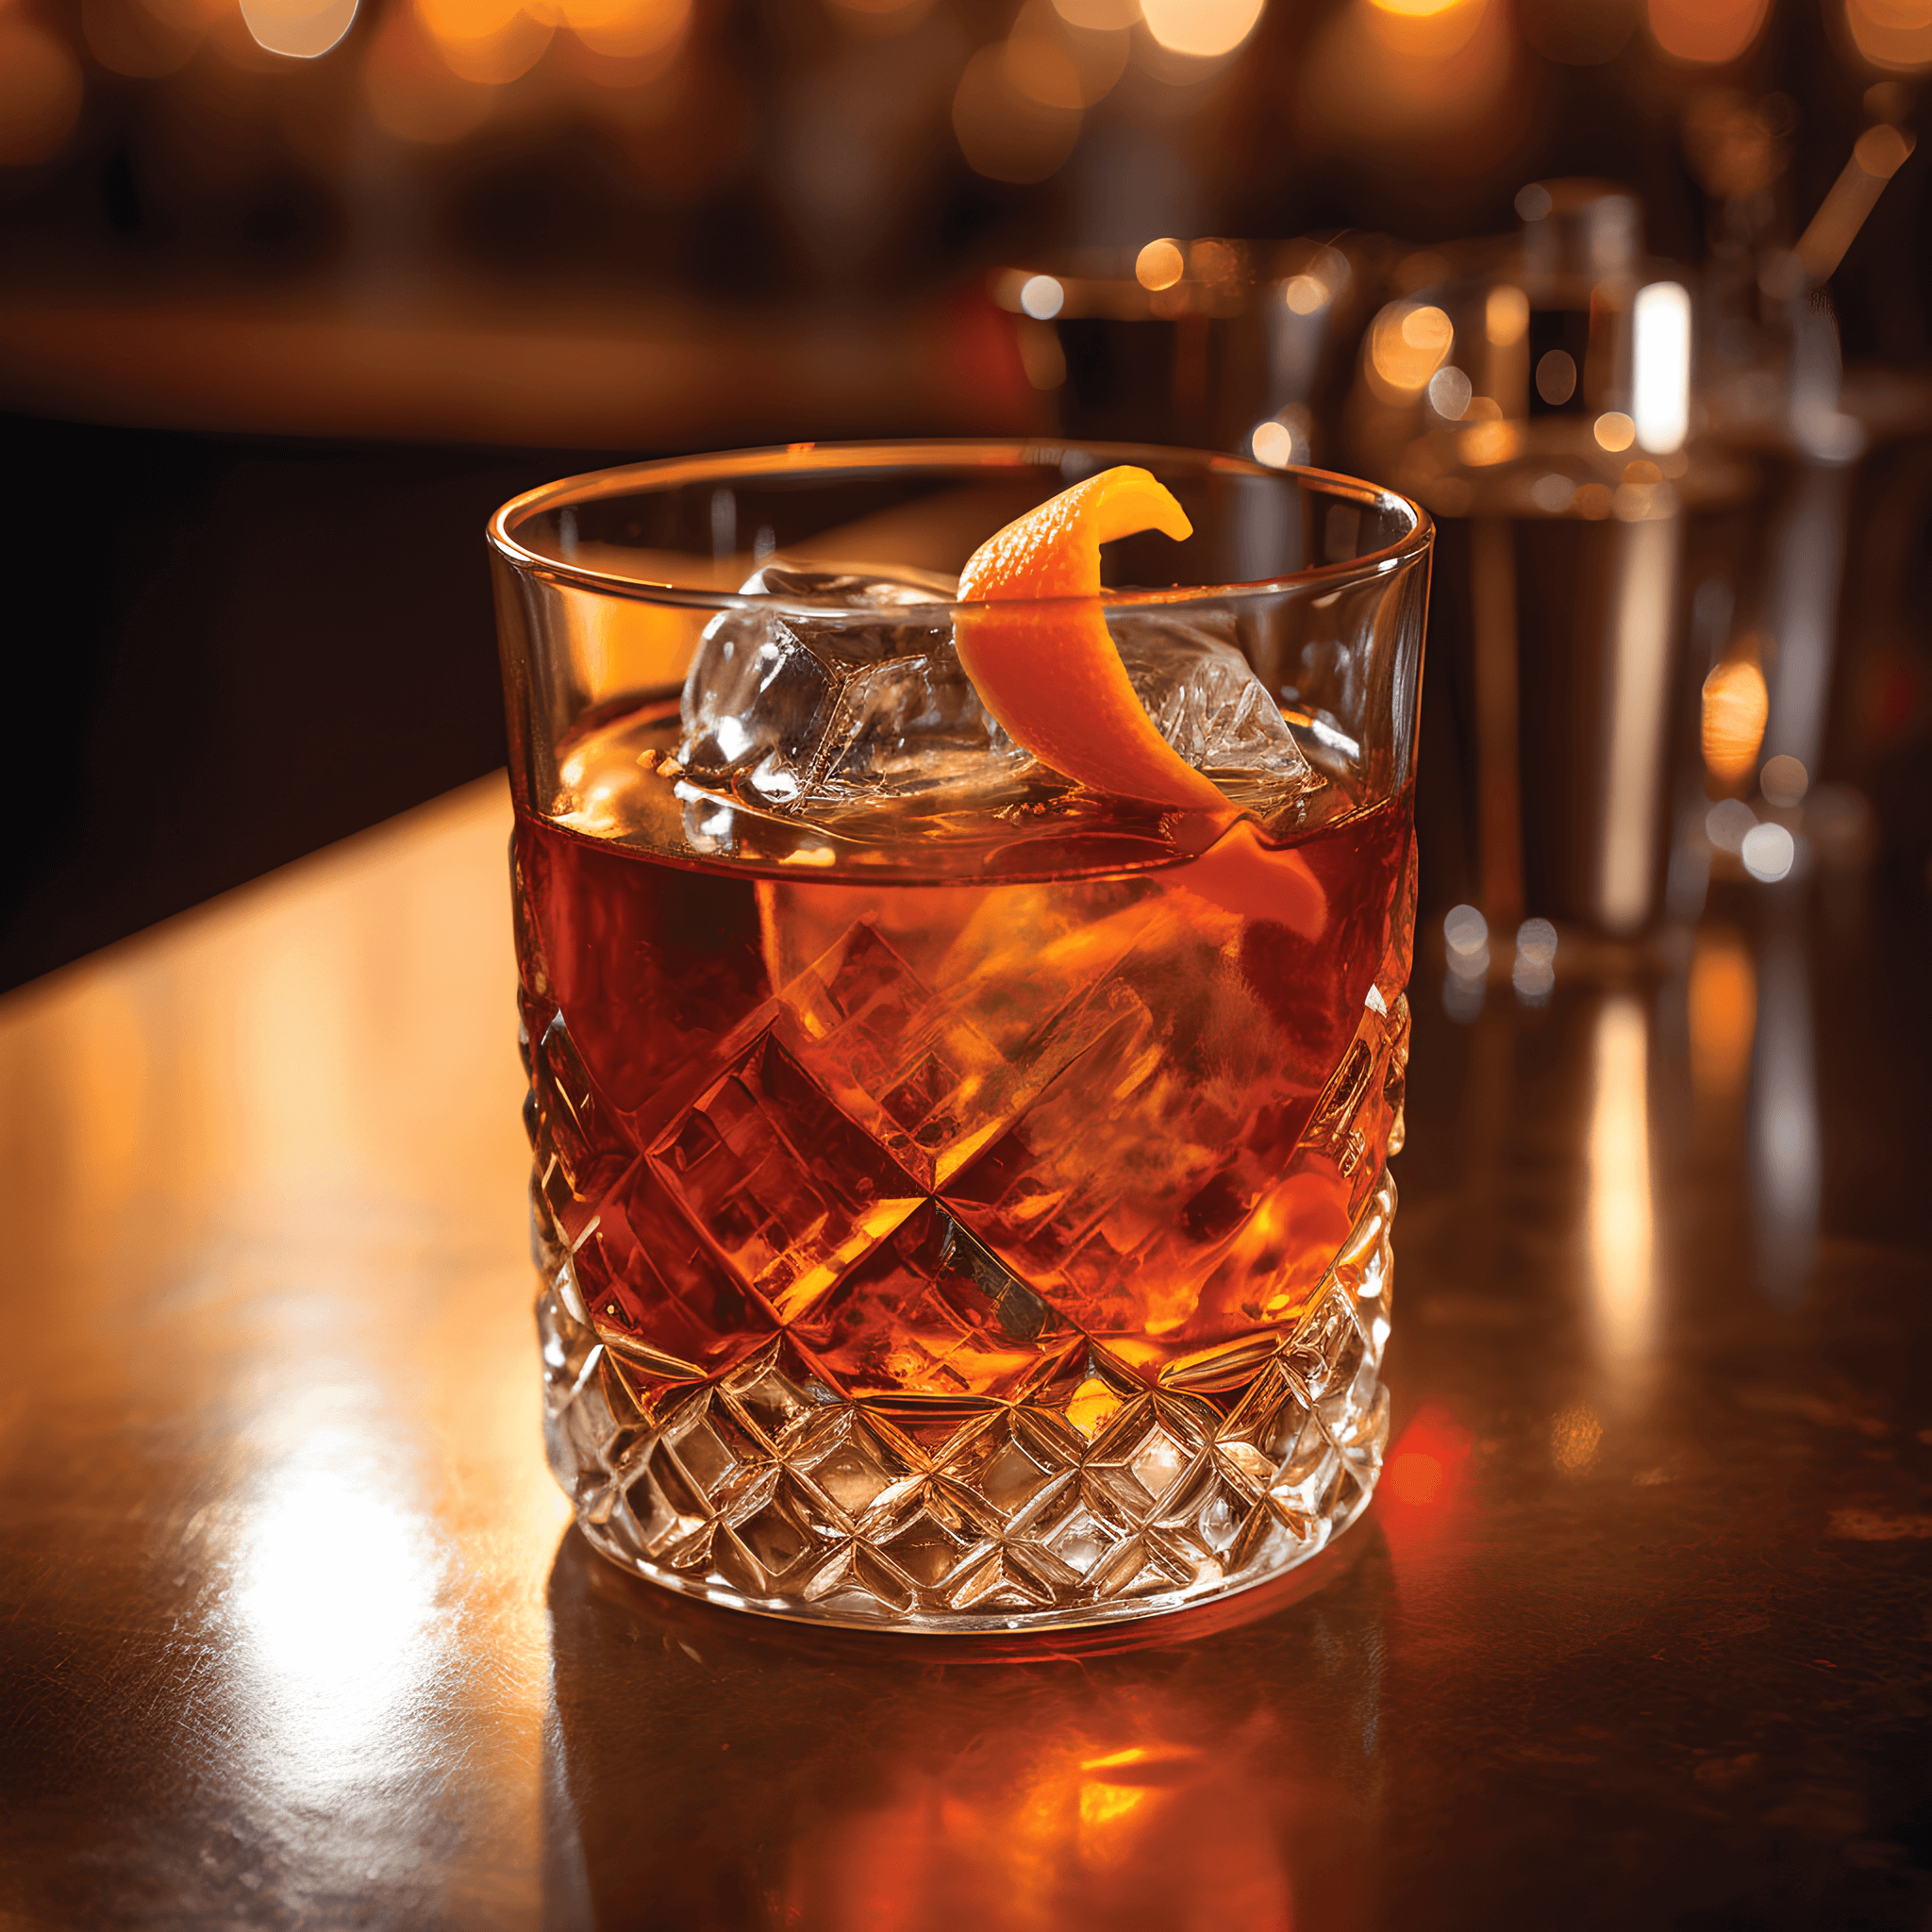 The Old Fashioned has a rich, complex taste that is both sweet and bitter. The whiskey provides a strong, warming base, while the sugar and bitters add a touch of sweetness and a hint of spice. The orange and cherry garnish add a subtle fruity note.